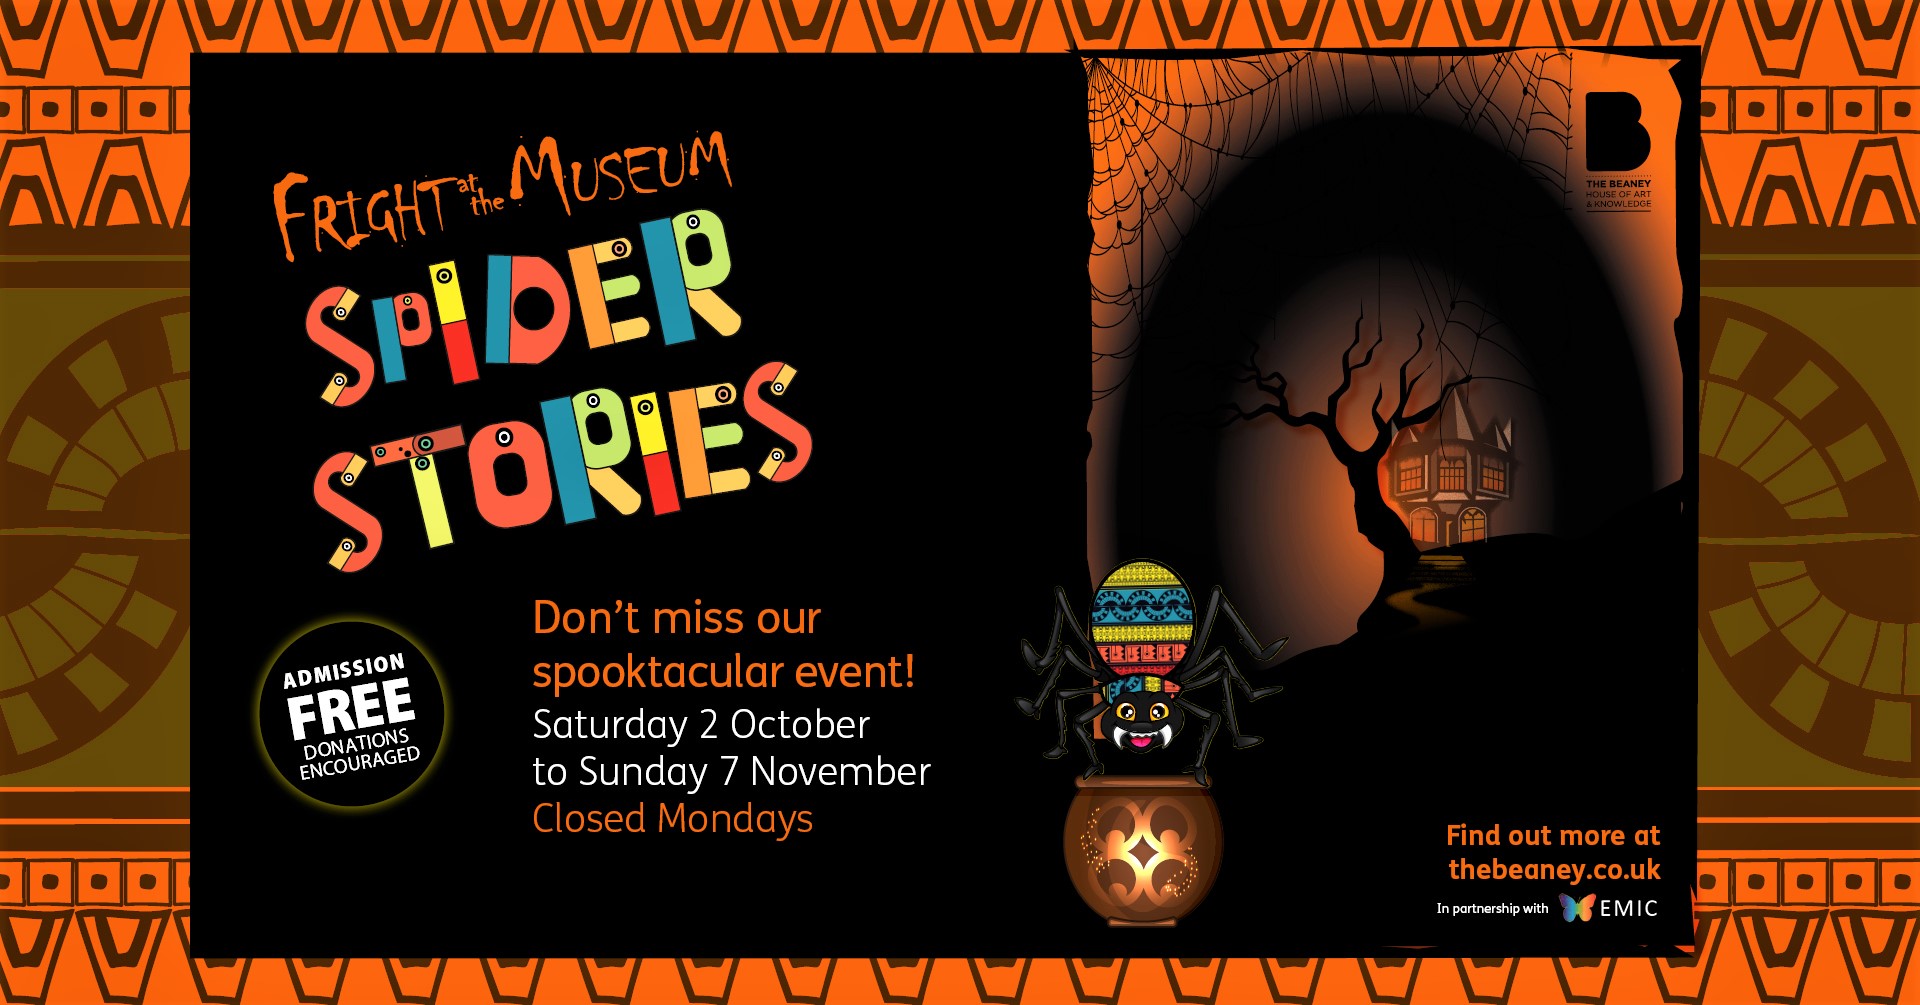 An event banner for Fright at the Museum Spider Stories - don't miss our spooktacular event! Saturday 2 October to Sunday 7 November